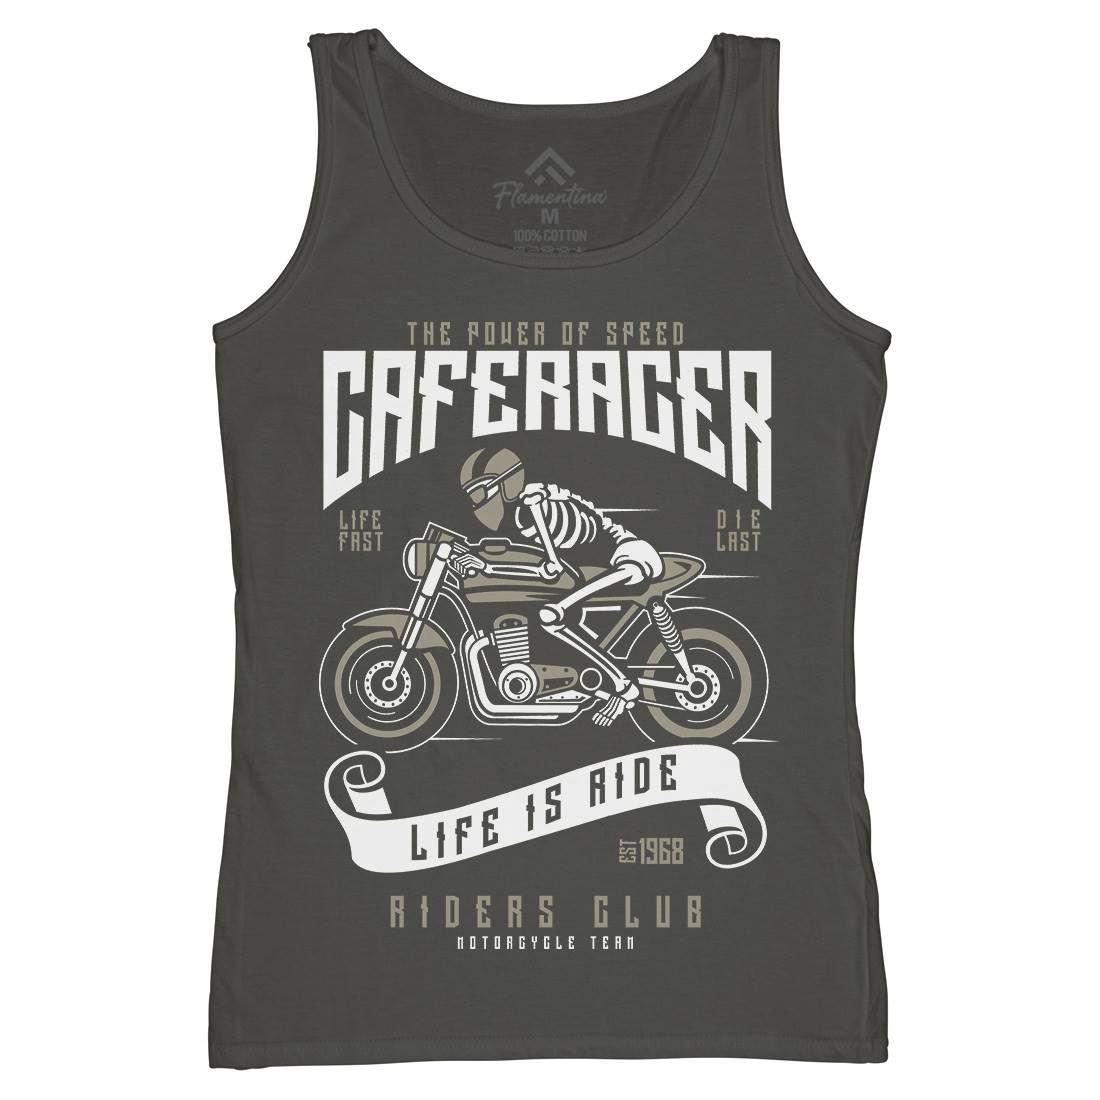 Speed Of Caferacer Womens Organic Tank Top Vest Motorcycles A154